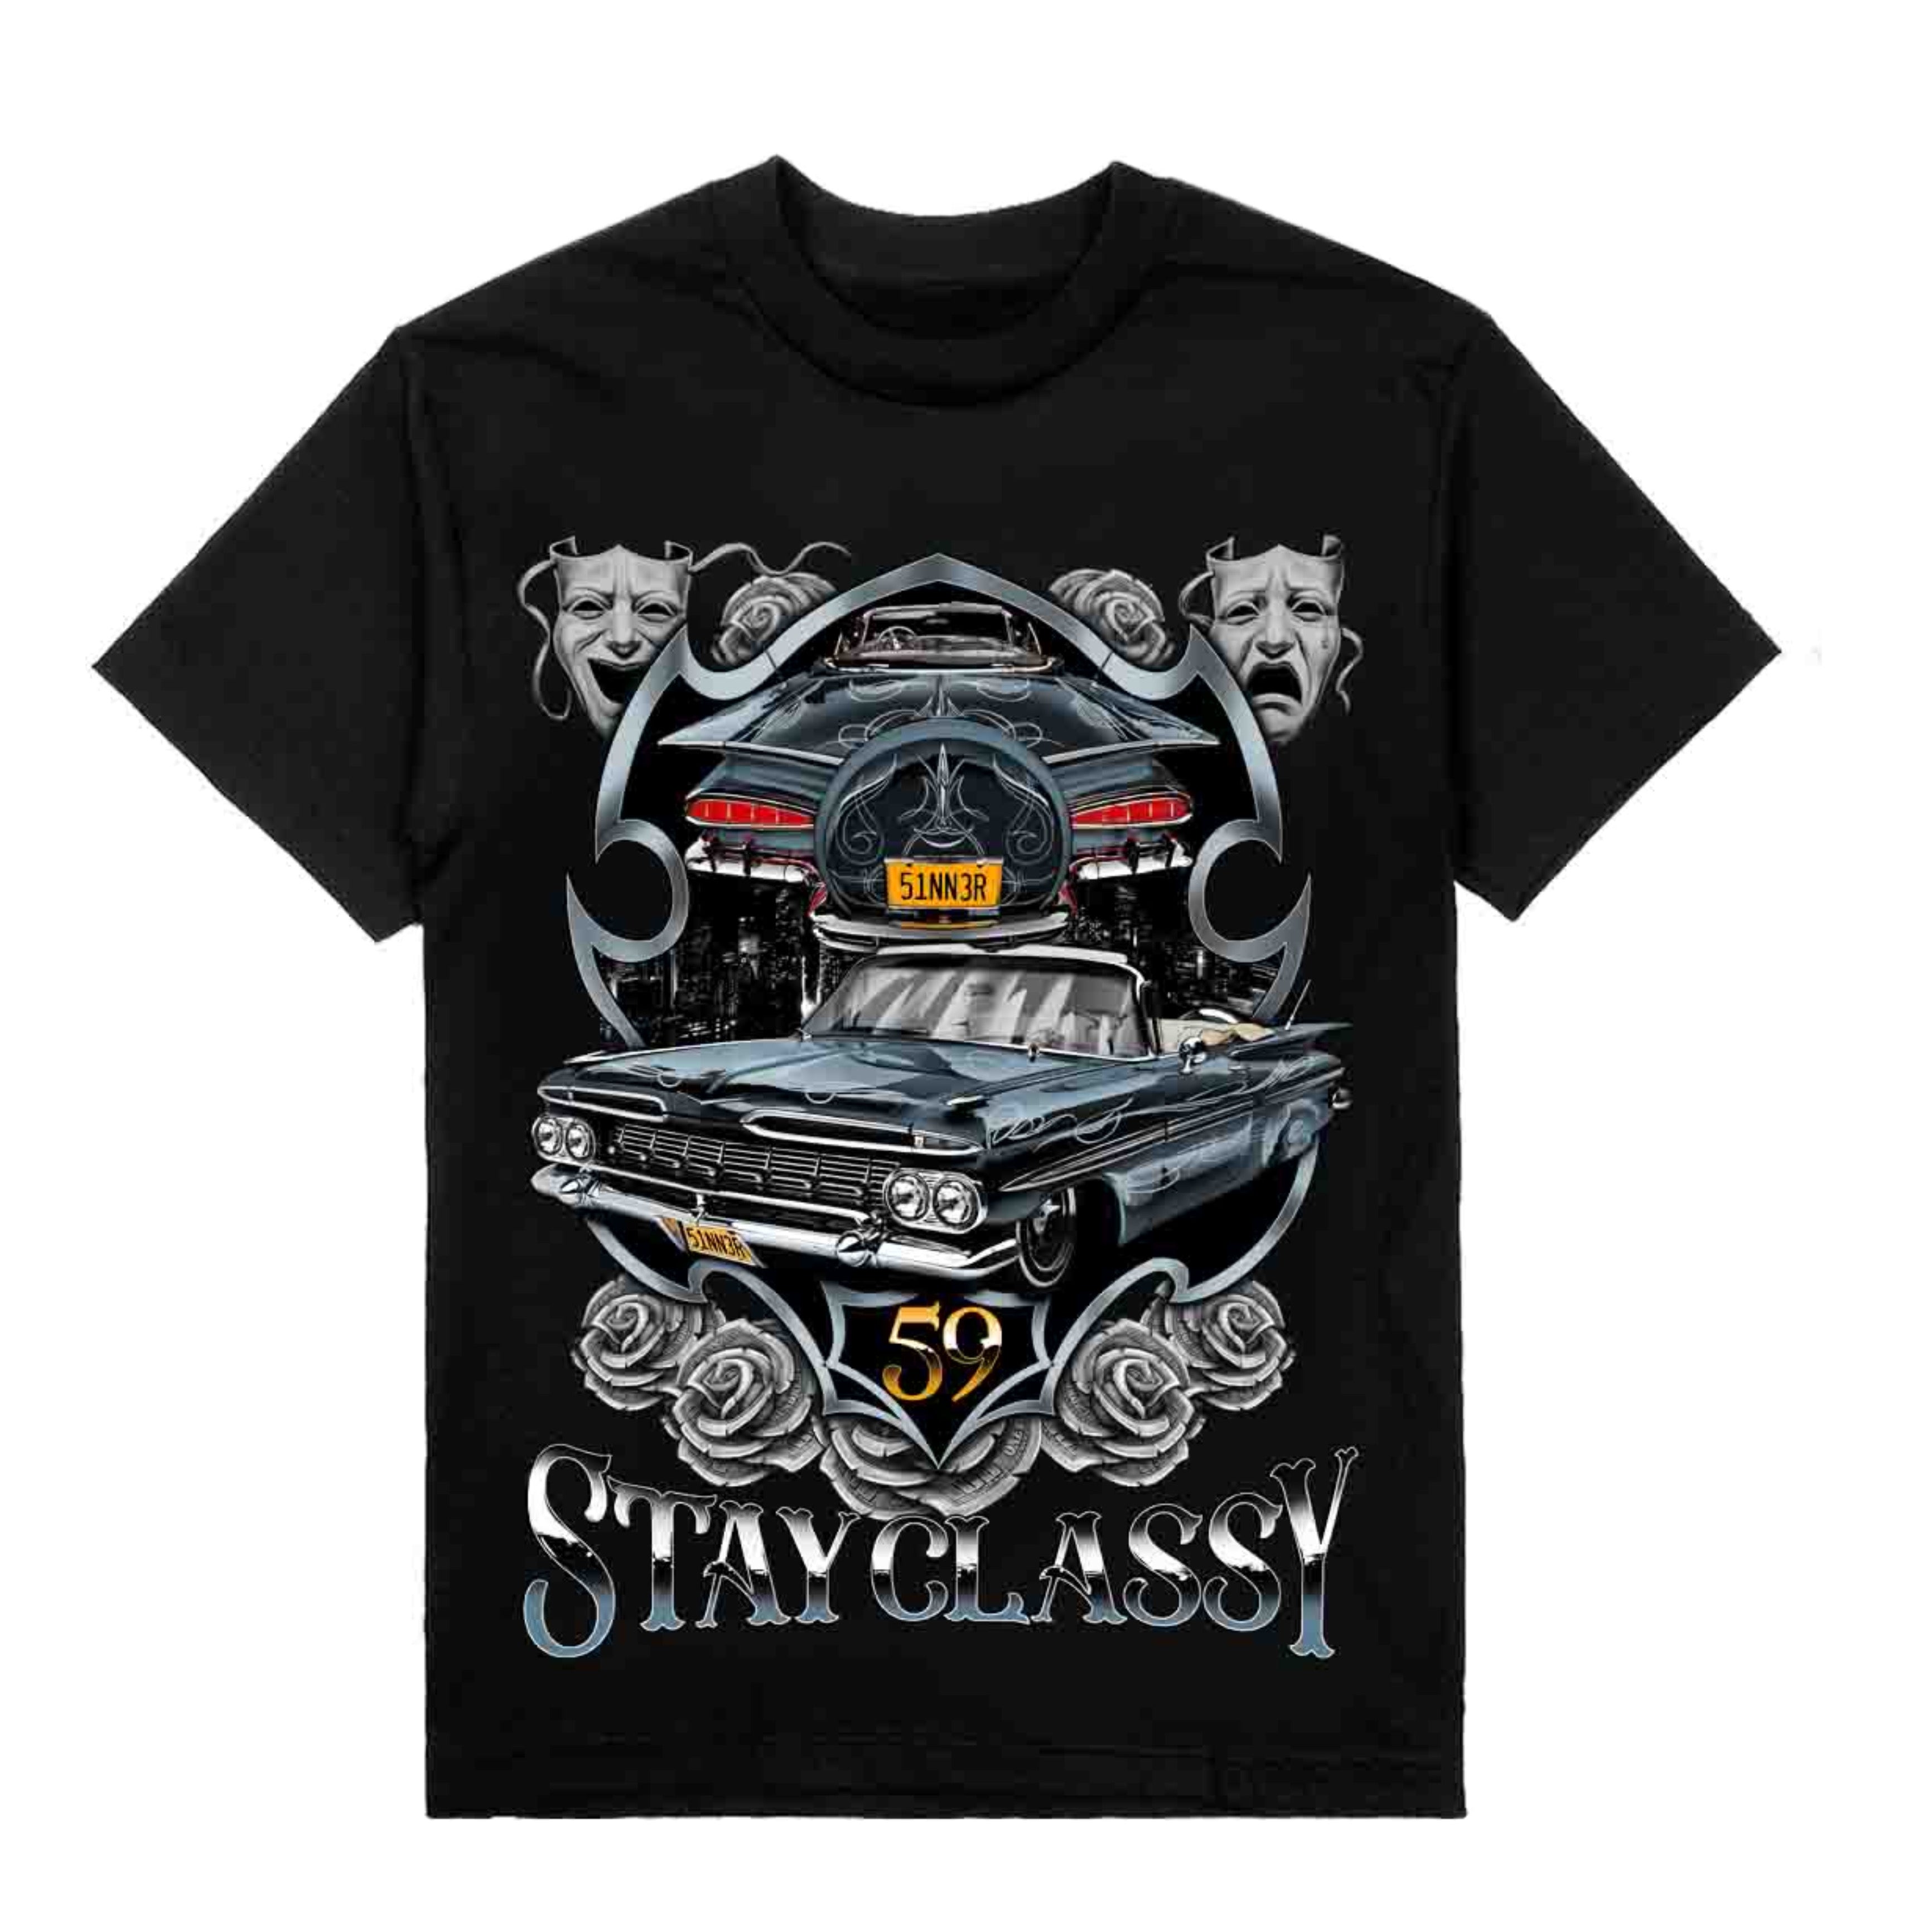 TFashion Graphic Tee - 59 Stay Classy